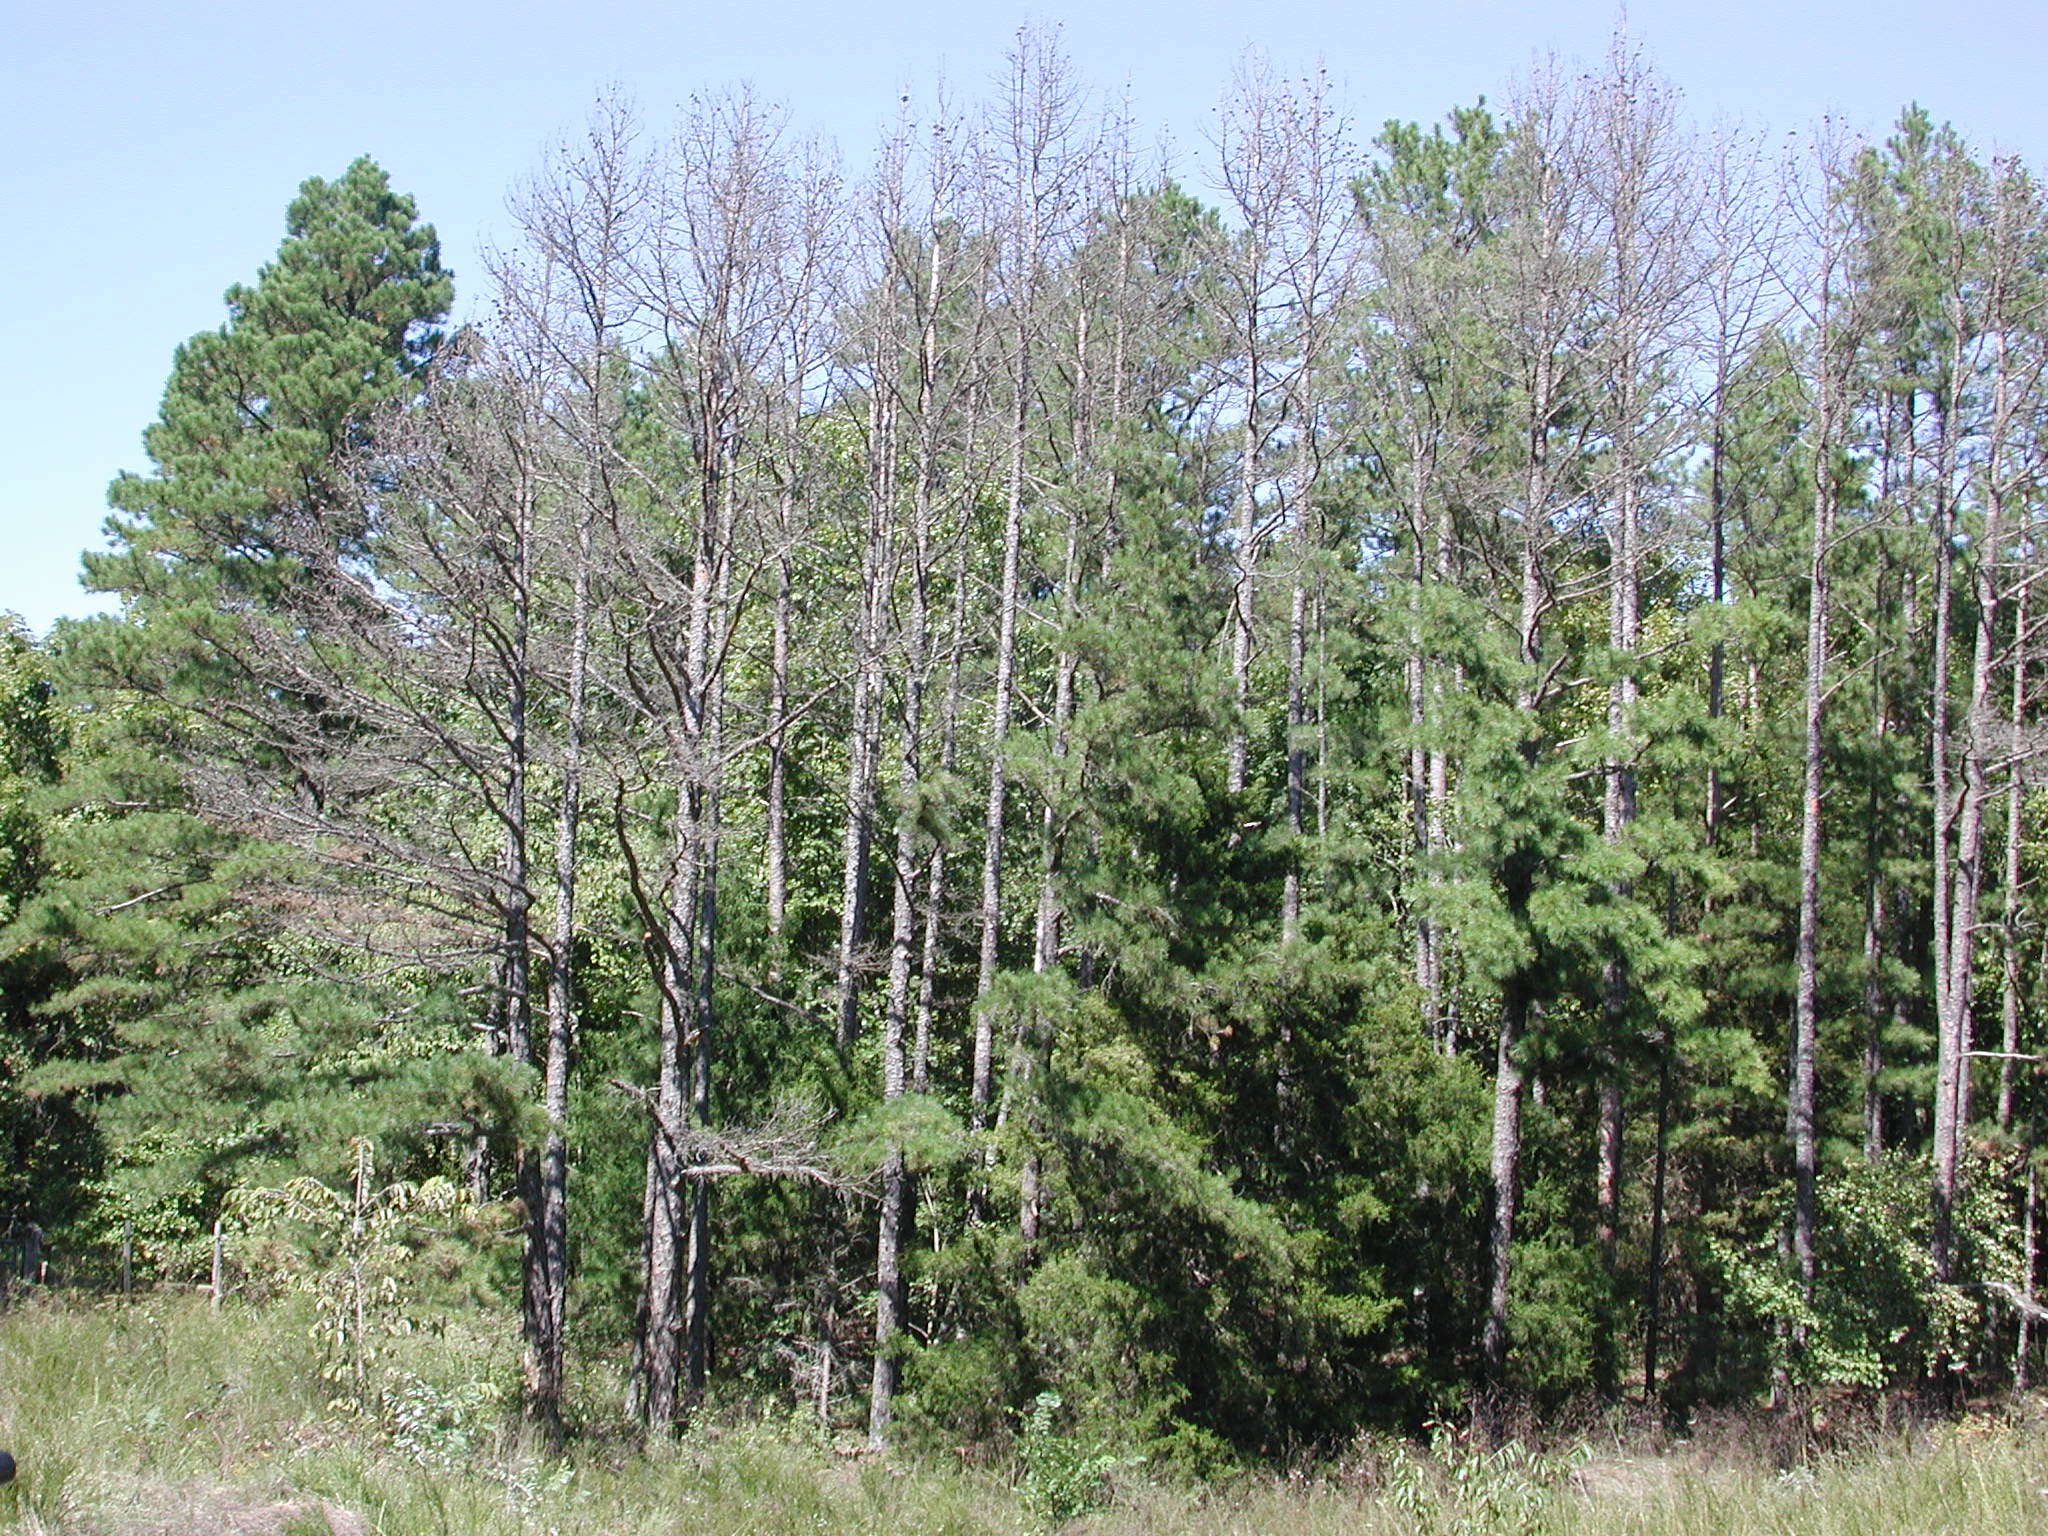 Stand of shortleaf pines where some trees have no needles